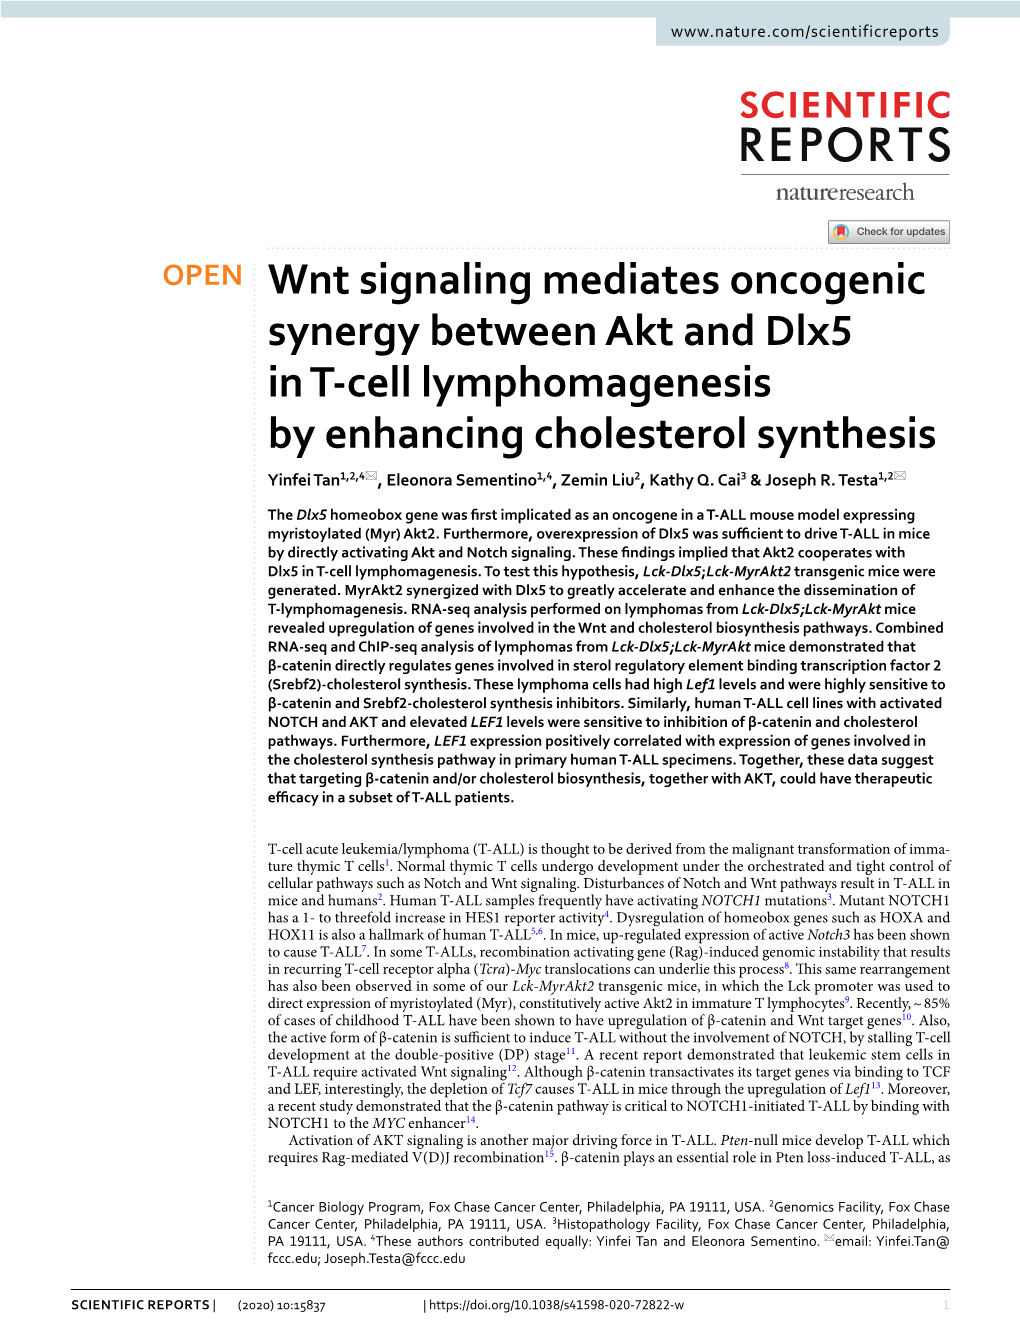 Wnt Signaling Mediates Oncogenic Synergy Between Akt and Dlx5 in T